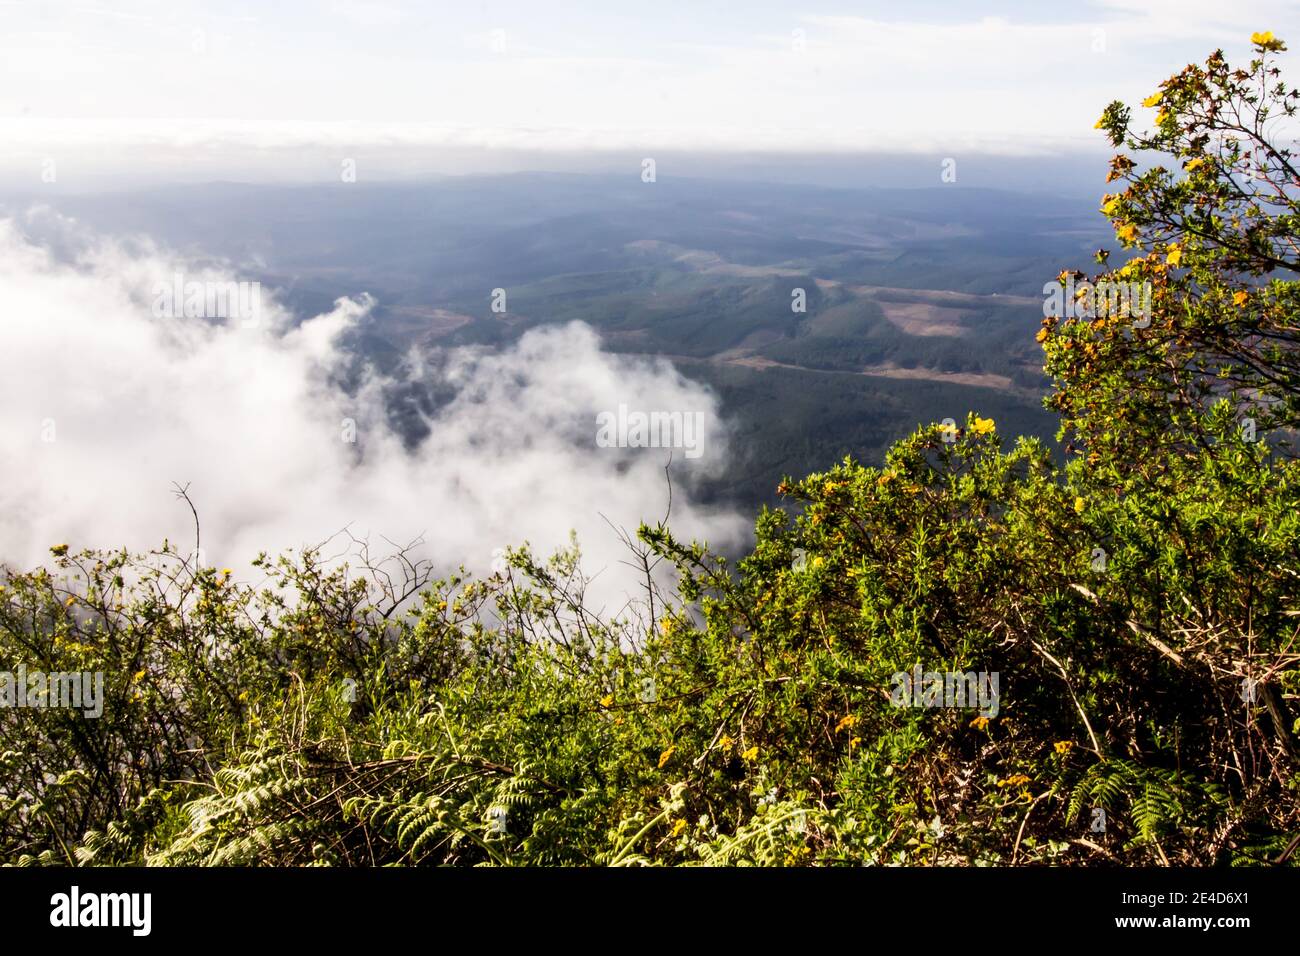 Clouds in the morning pulling back to reveal the vast expanse of the South African Lowveld, as seen from Wonder view viewpoint Stock Photo